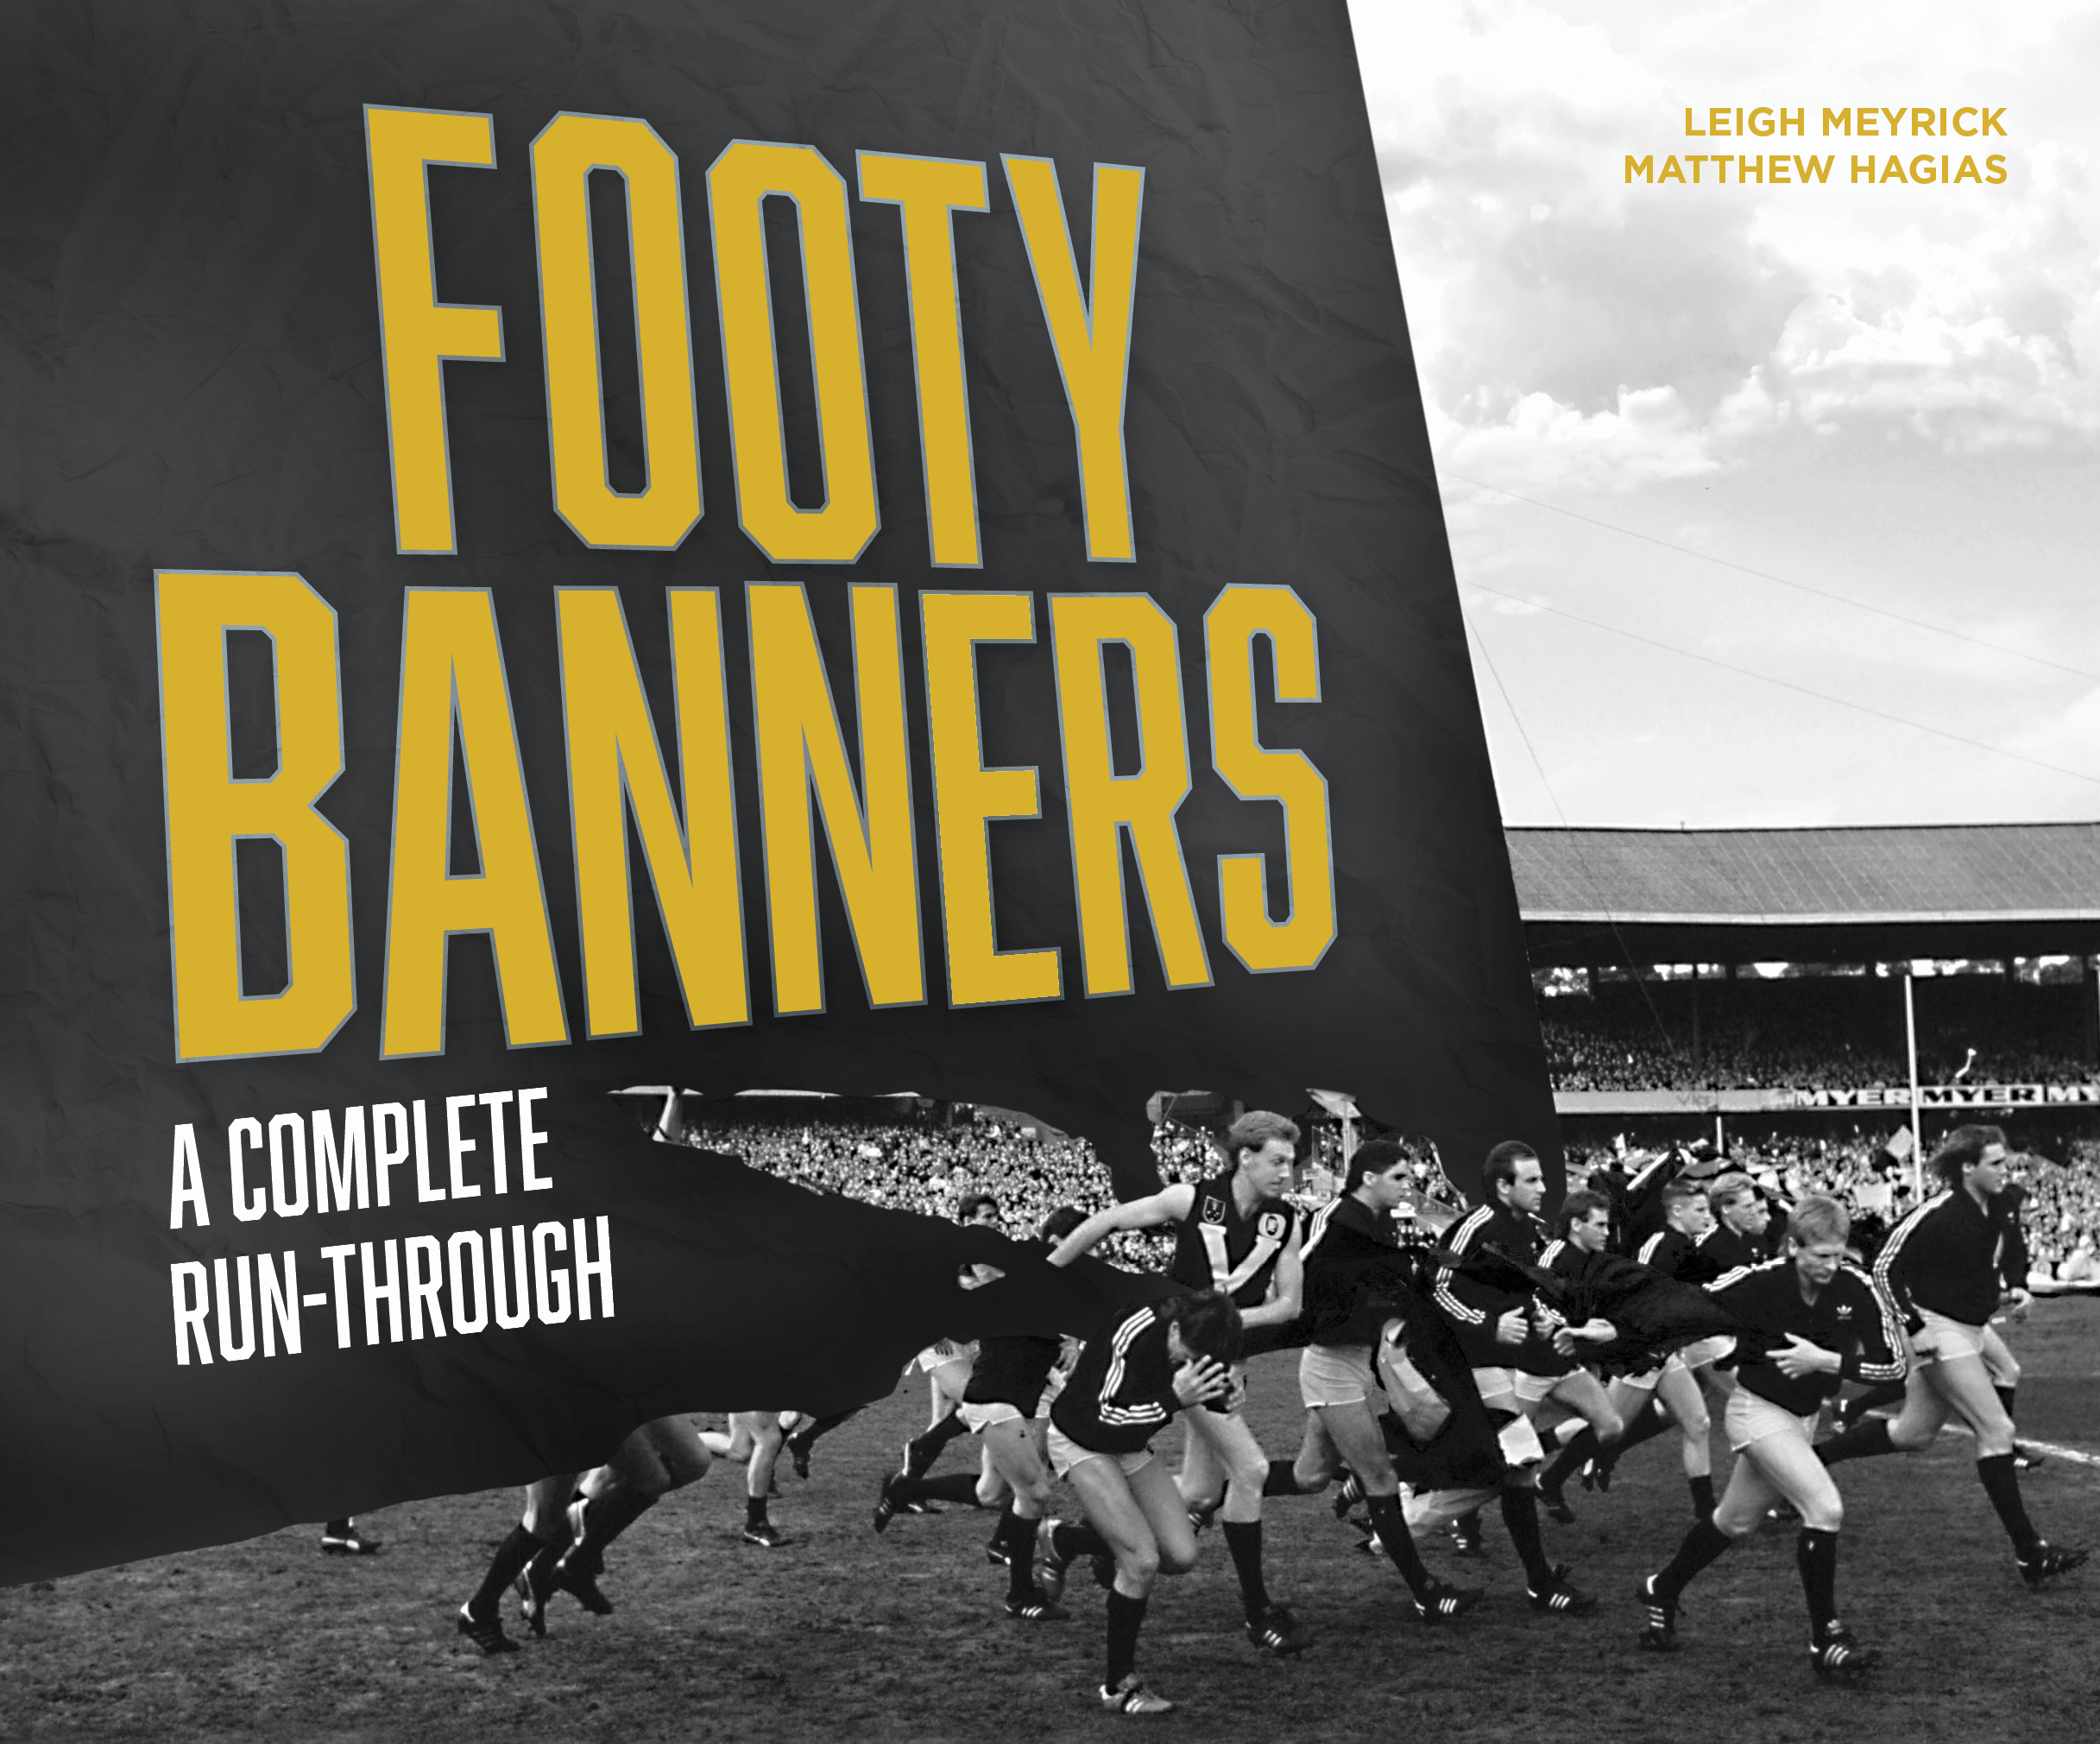 Footy Banners book